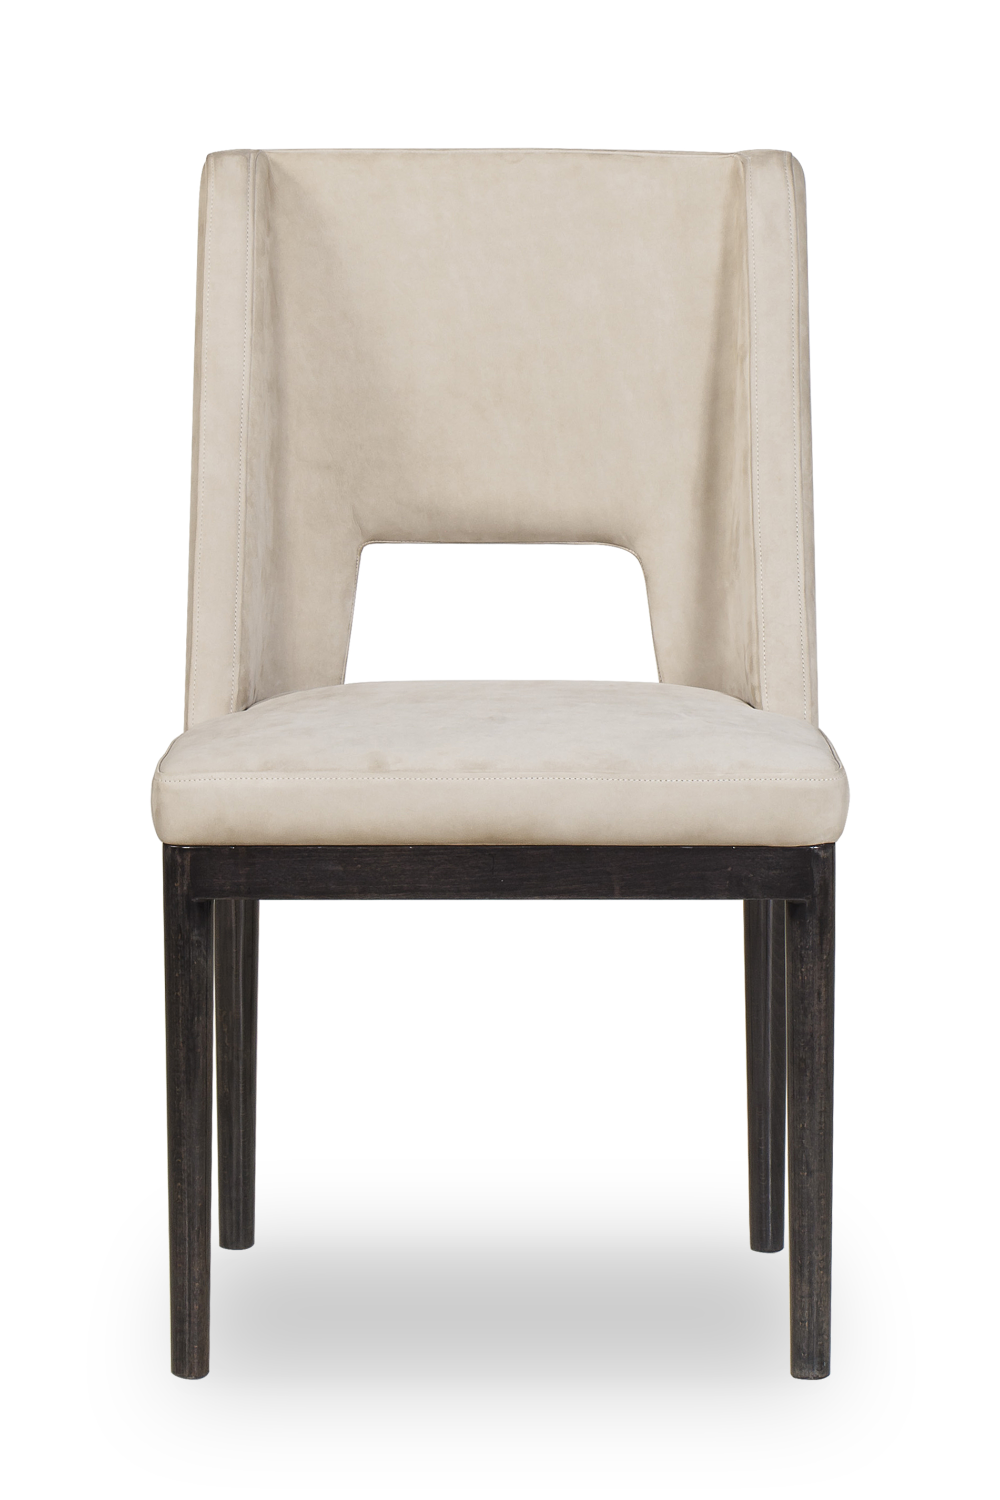 Beige Leather Dining Chair | Andrew Martin Maddison | Oroa.com